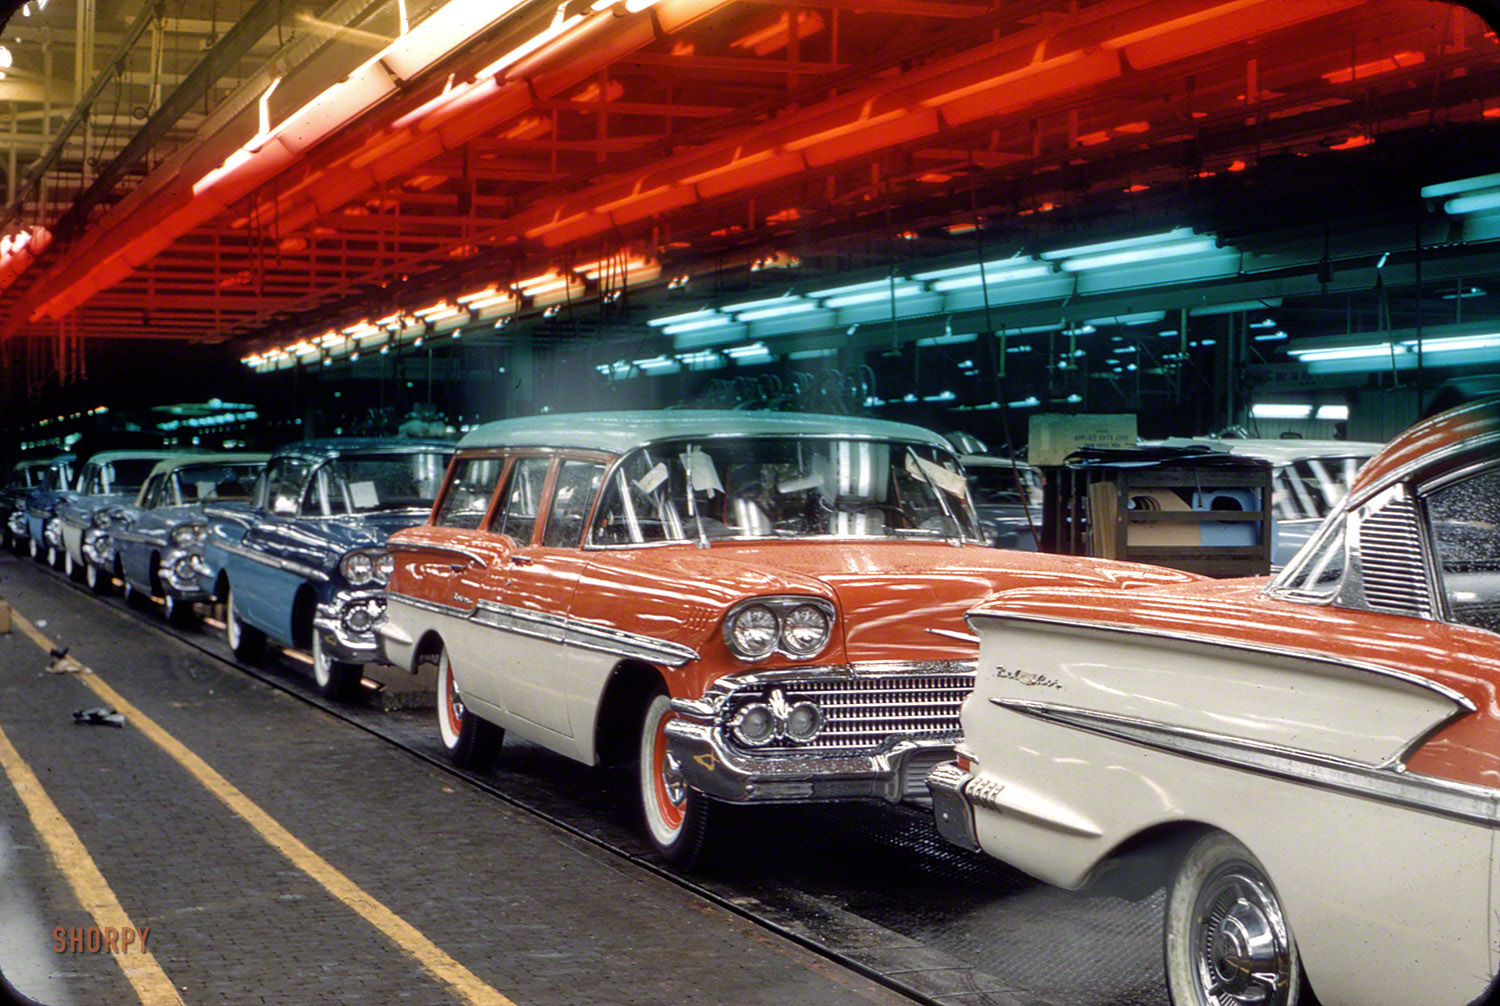 Completed 1958 Chevrolet models leaving the assembly line